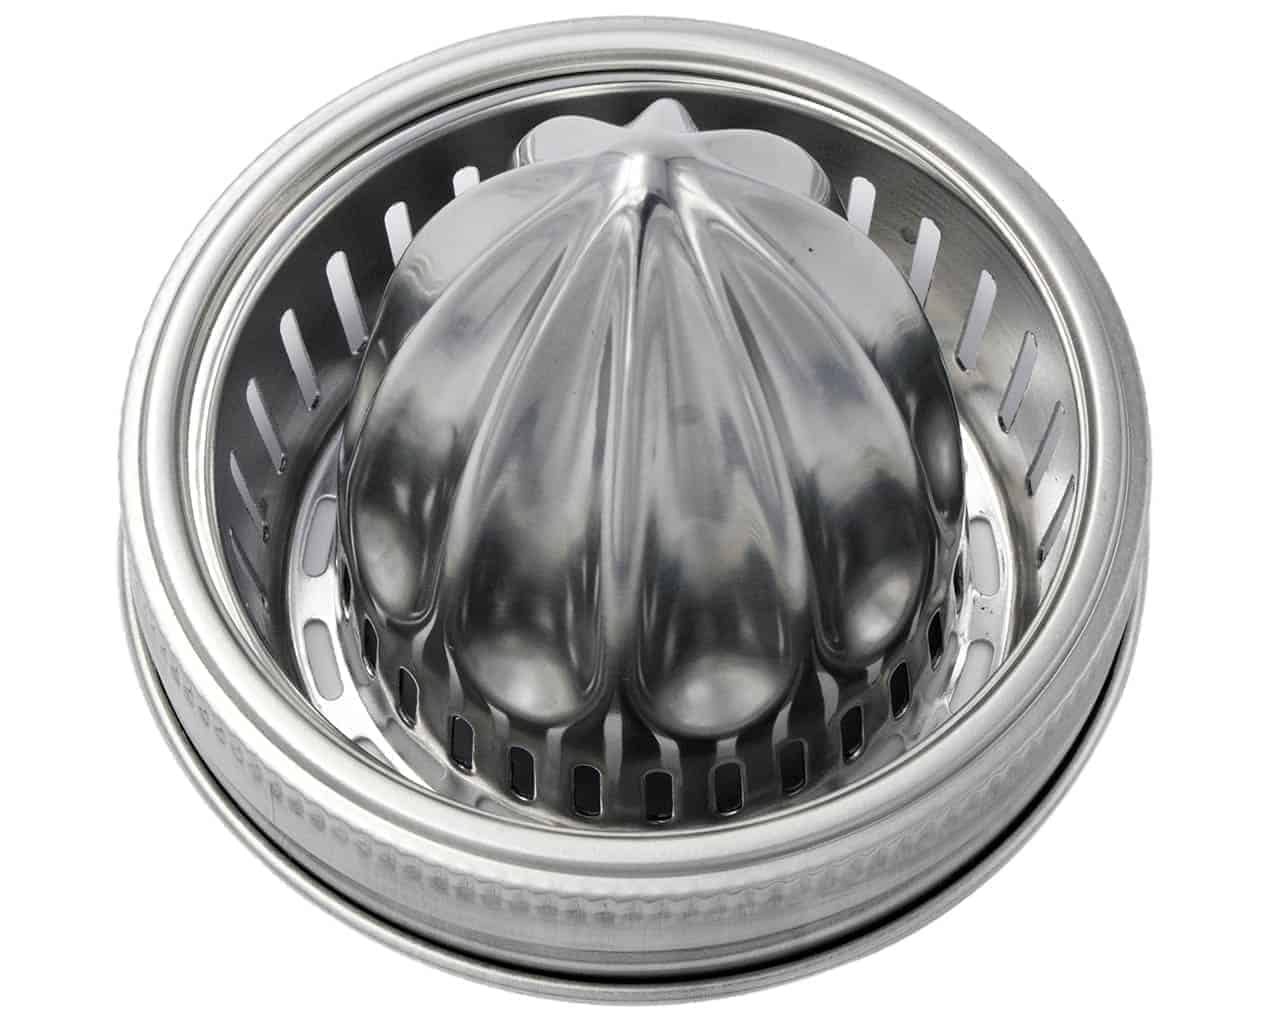 https://masonjarlifestyle.com/cdn/shop/files/jarware-citrus-juicer-lid-with-mason-jar-lifestyle-wide-mouth-stainless-steel-rust-proof-band.jpg?v=1695766924&width=1280